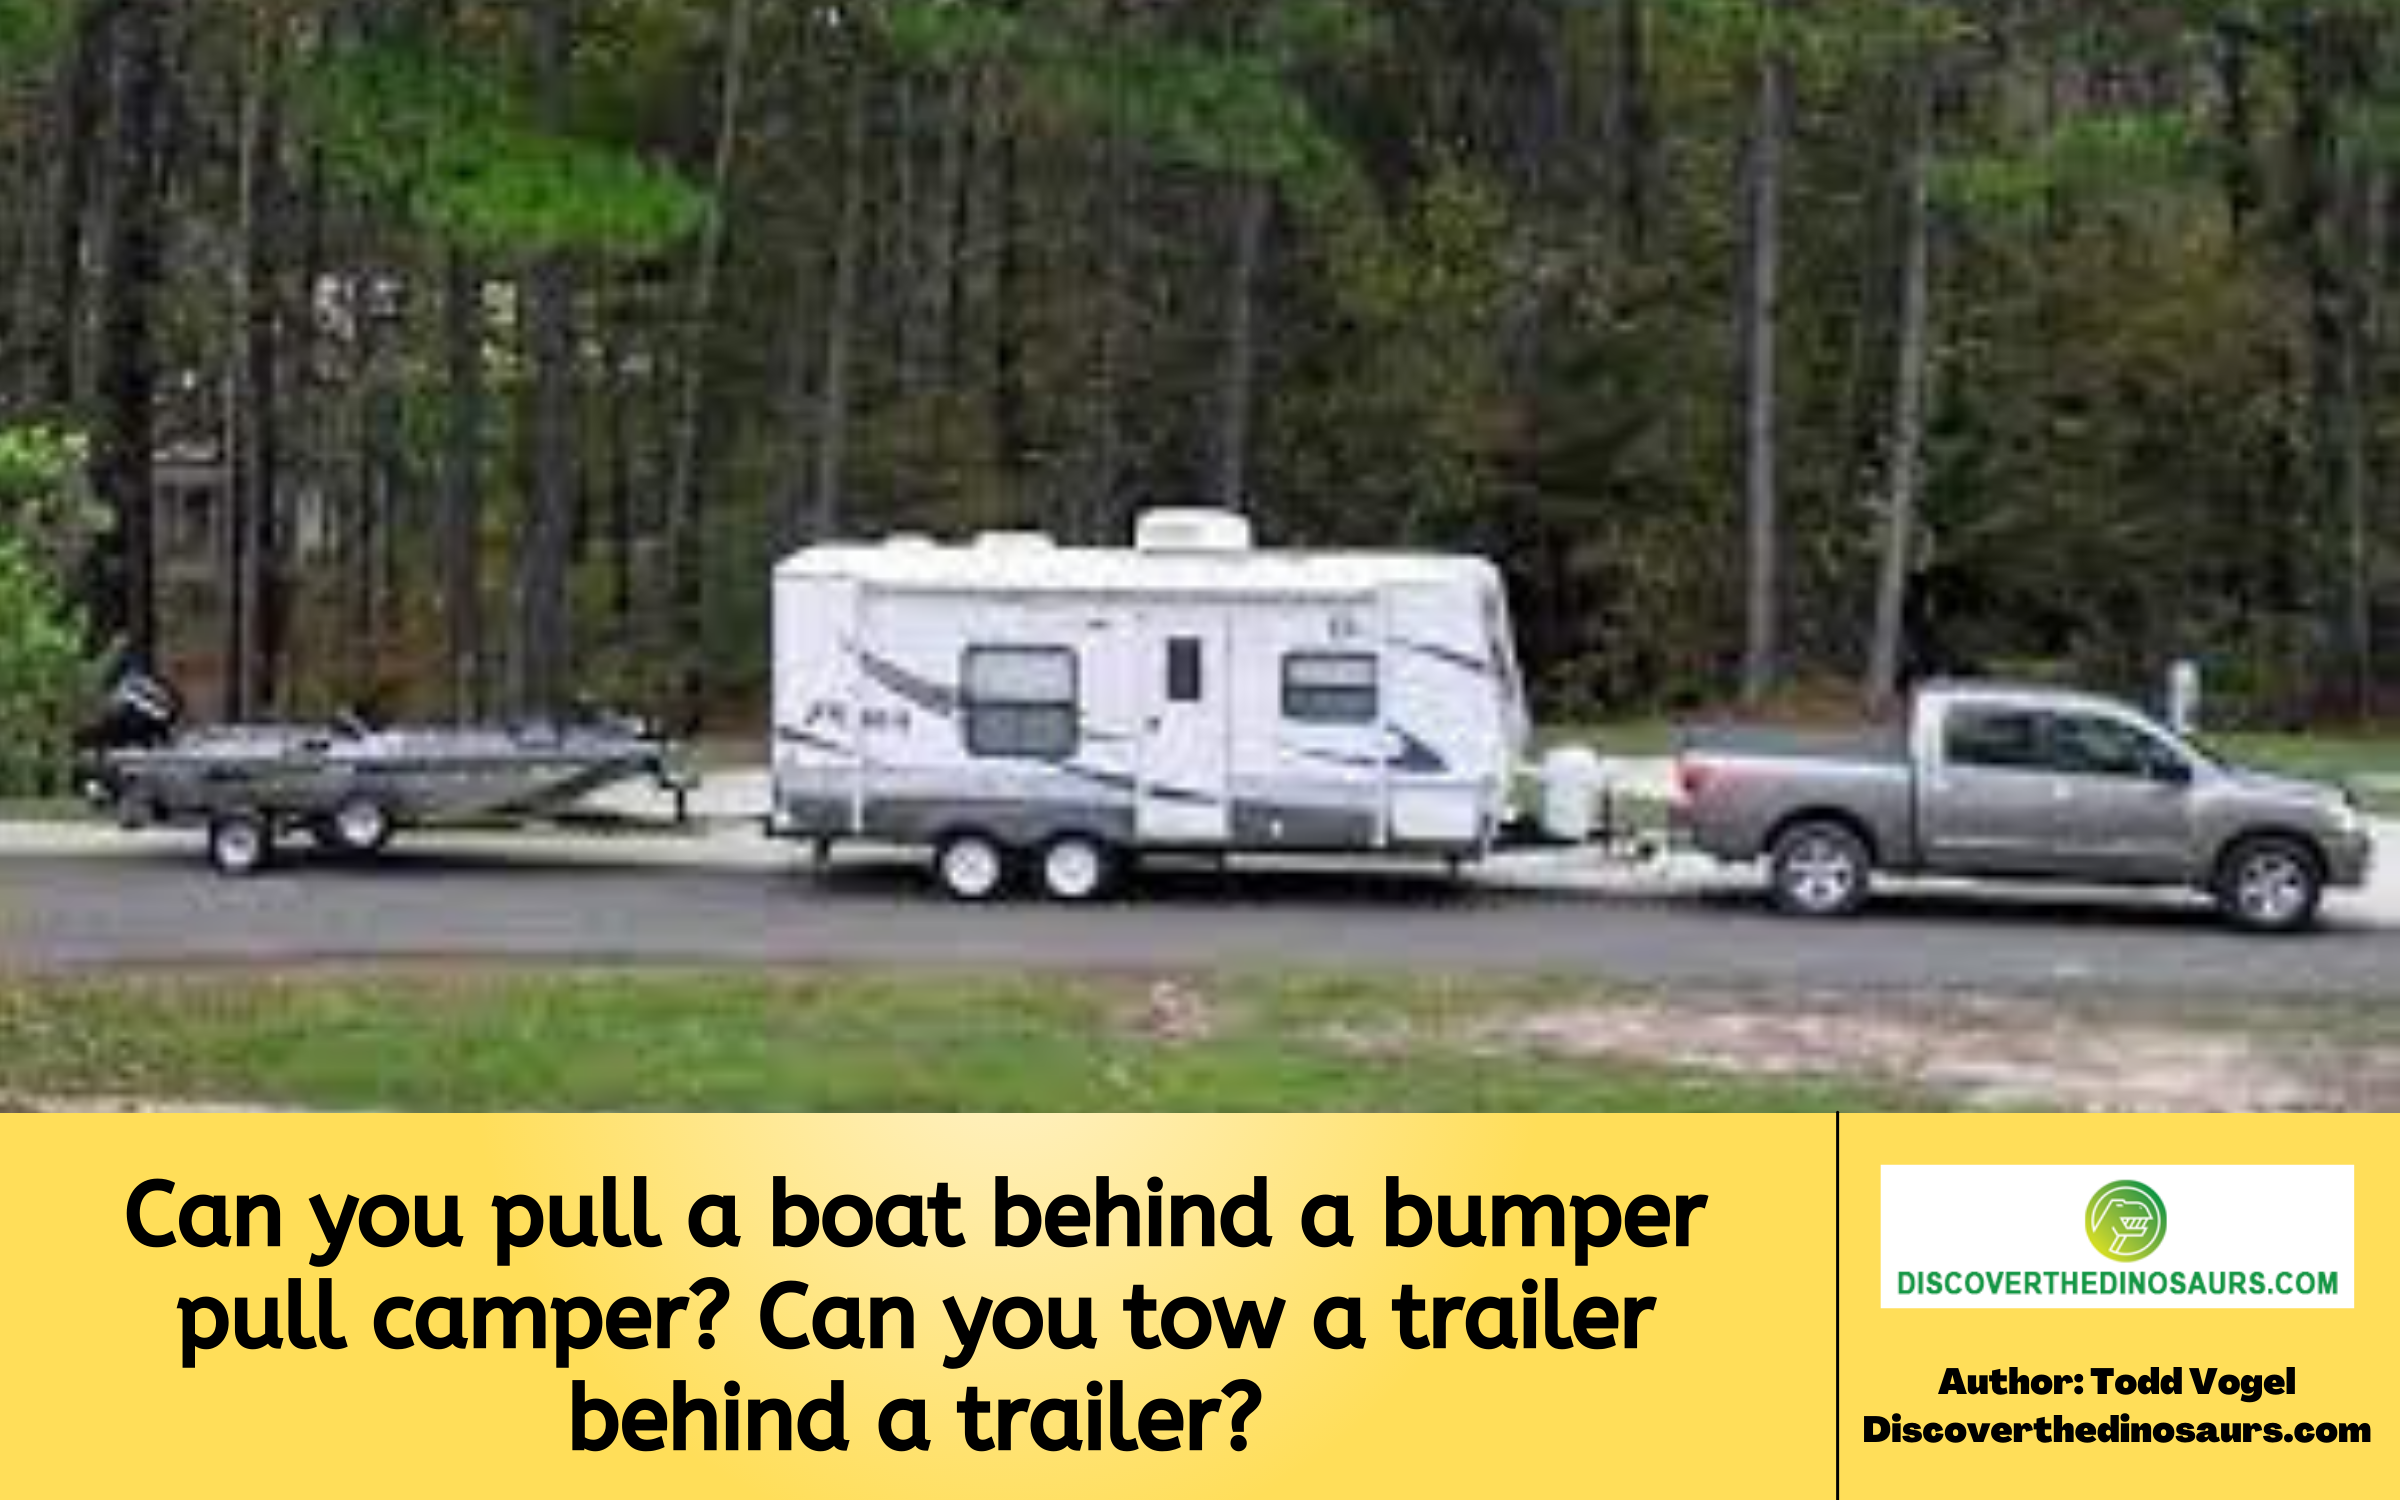 Can you pull a boat behind a bumper pull camper?